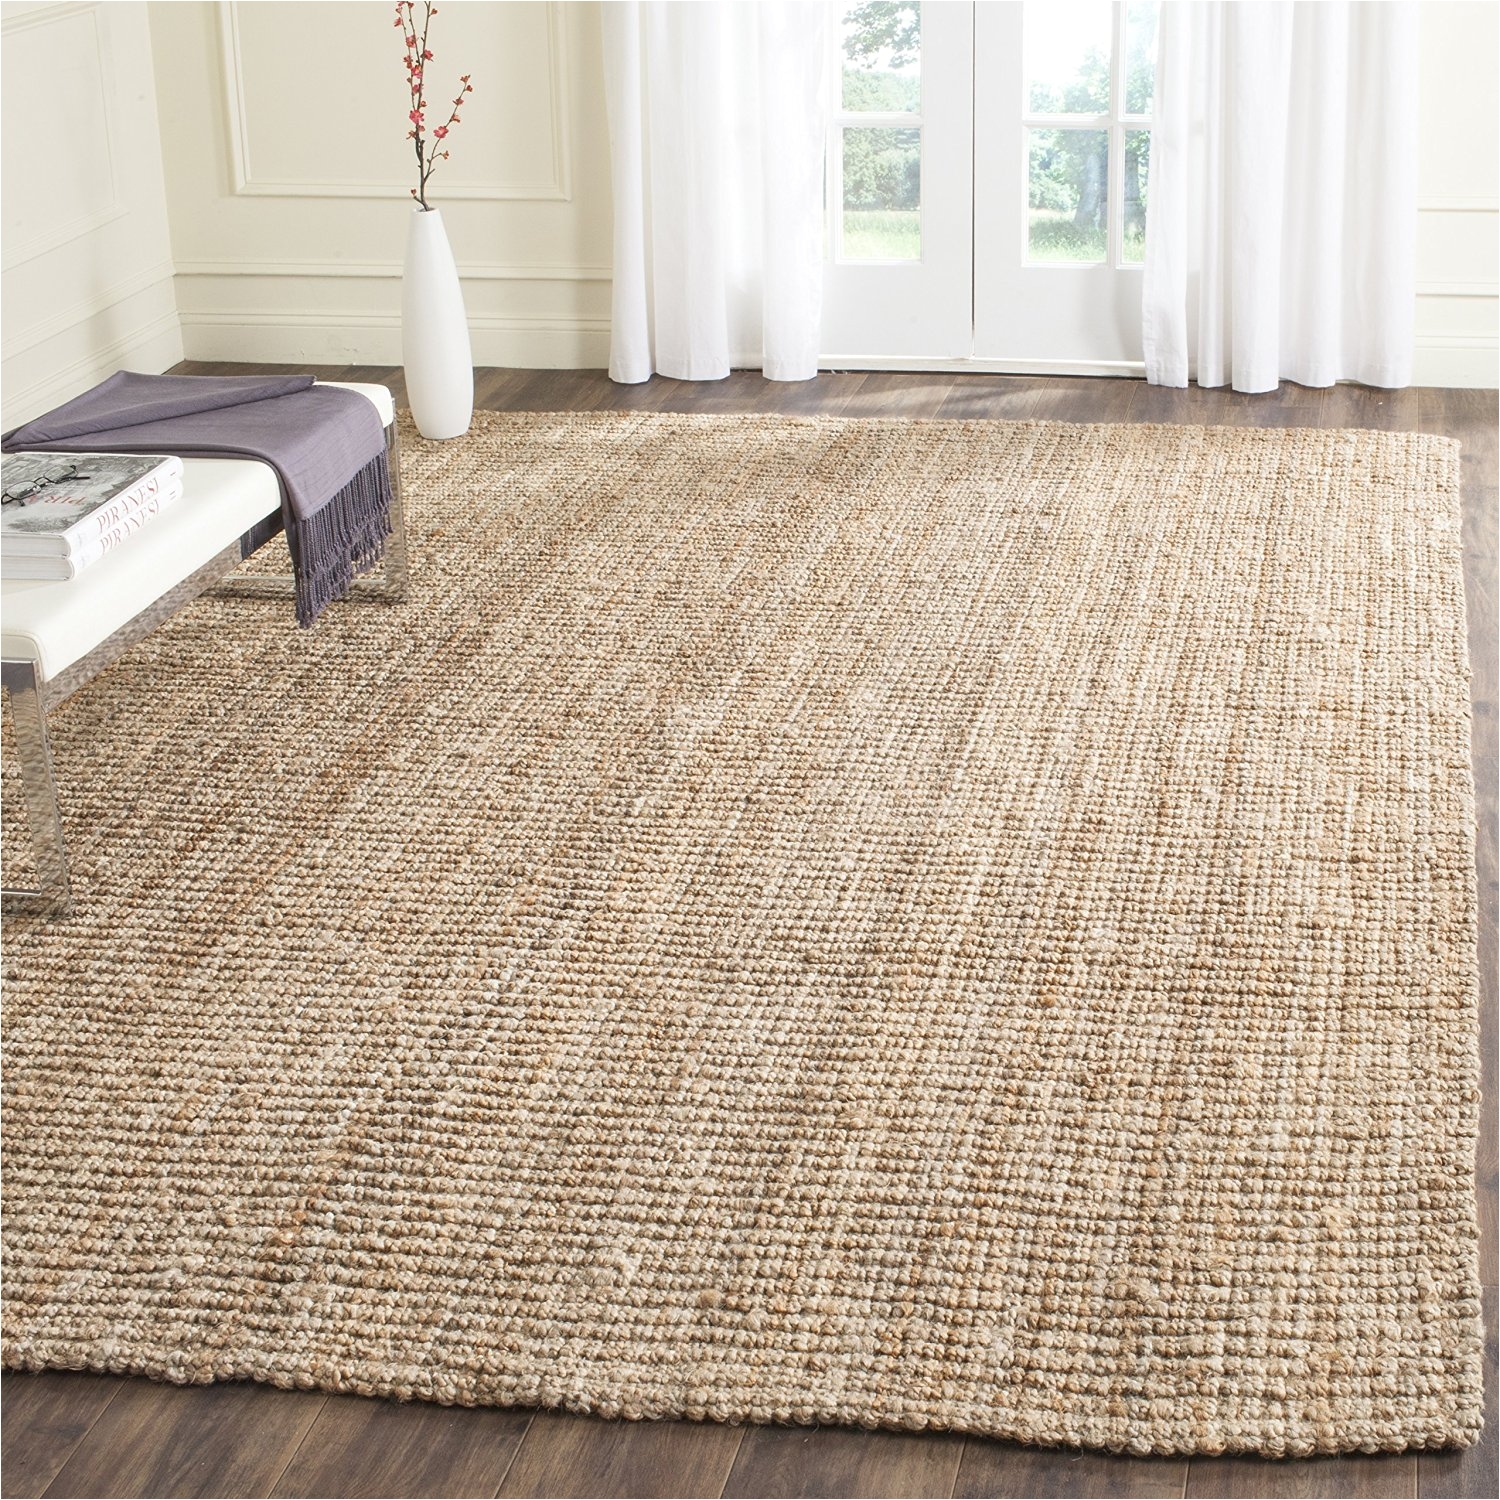 8x10 area rugs for dining room rug designs